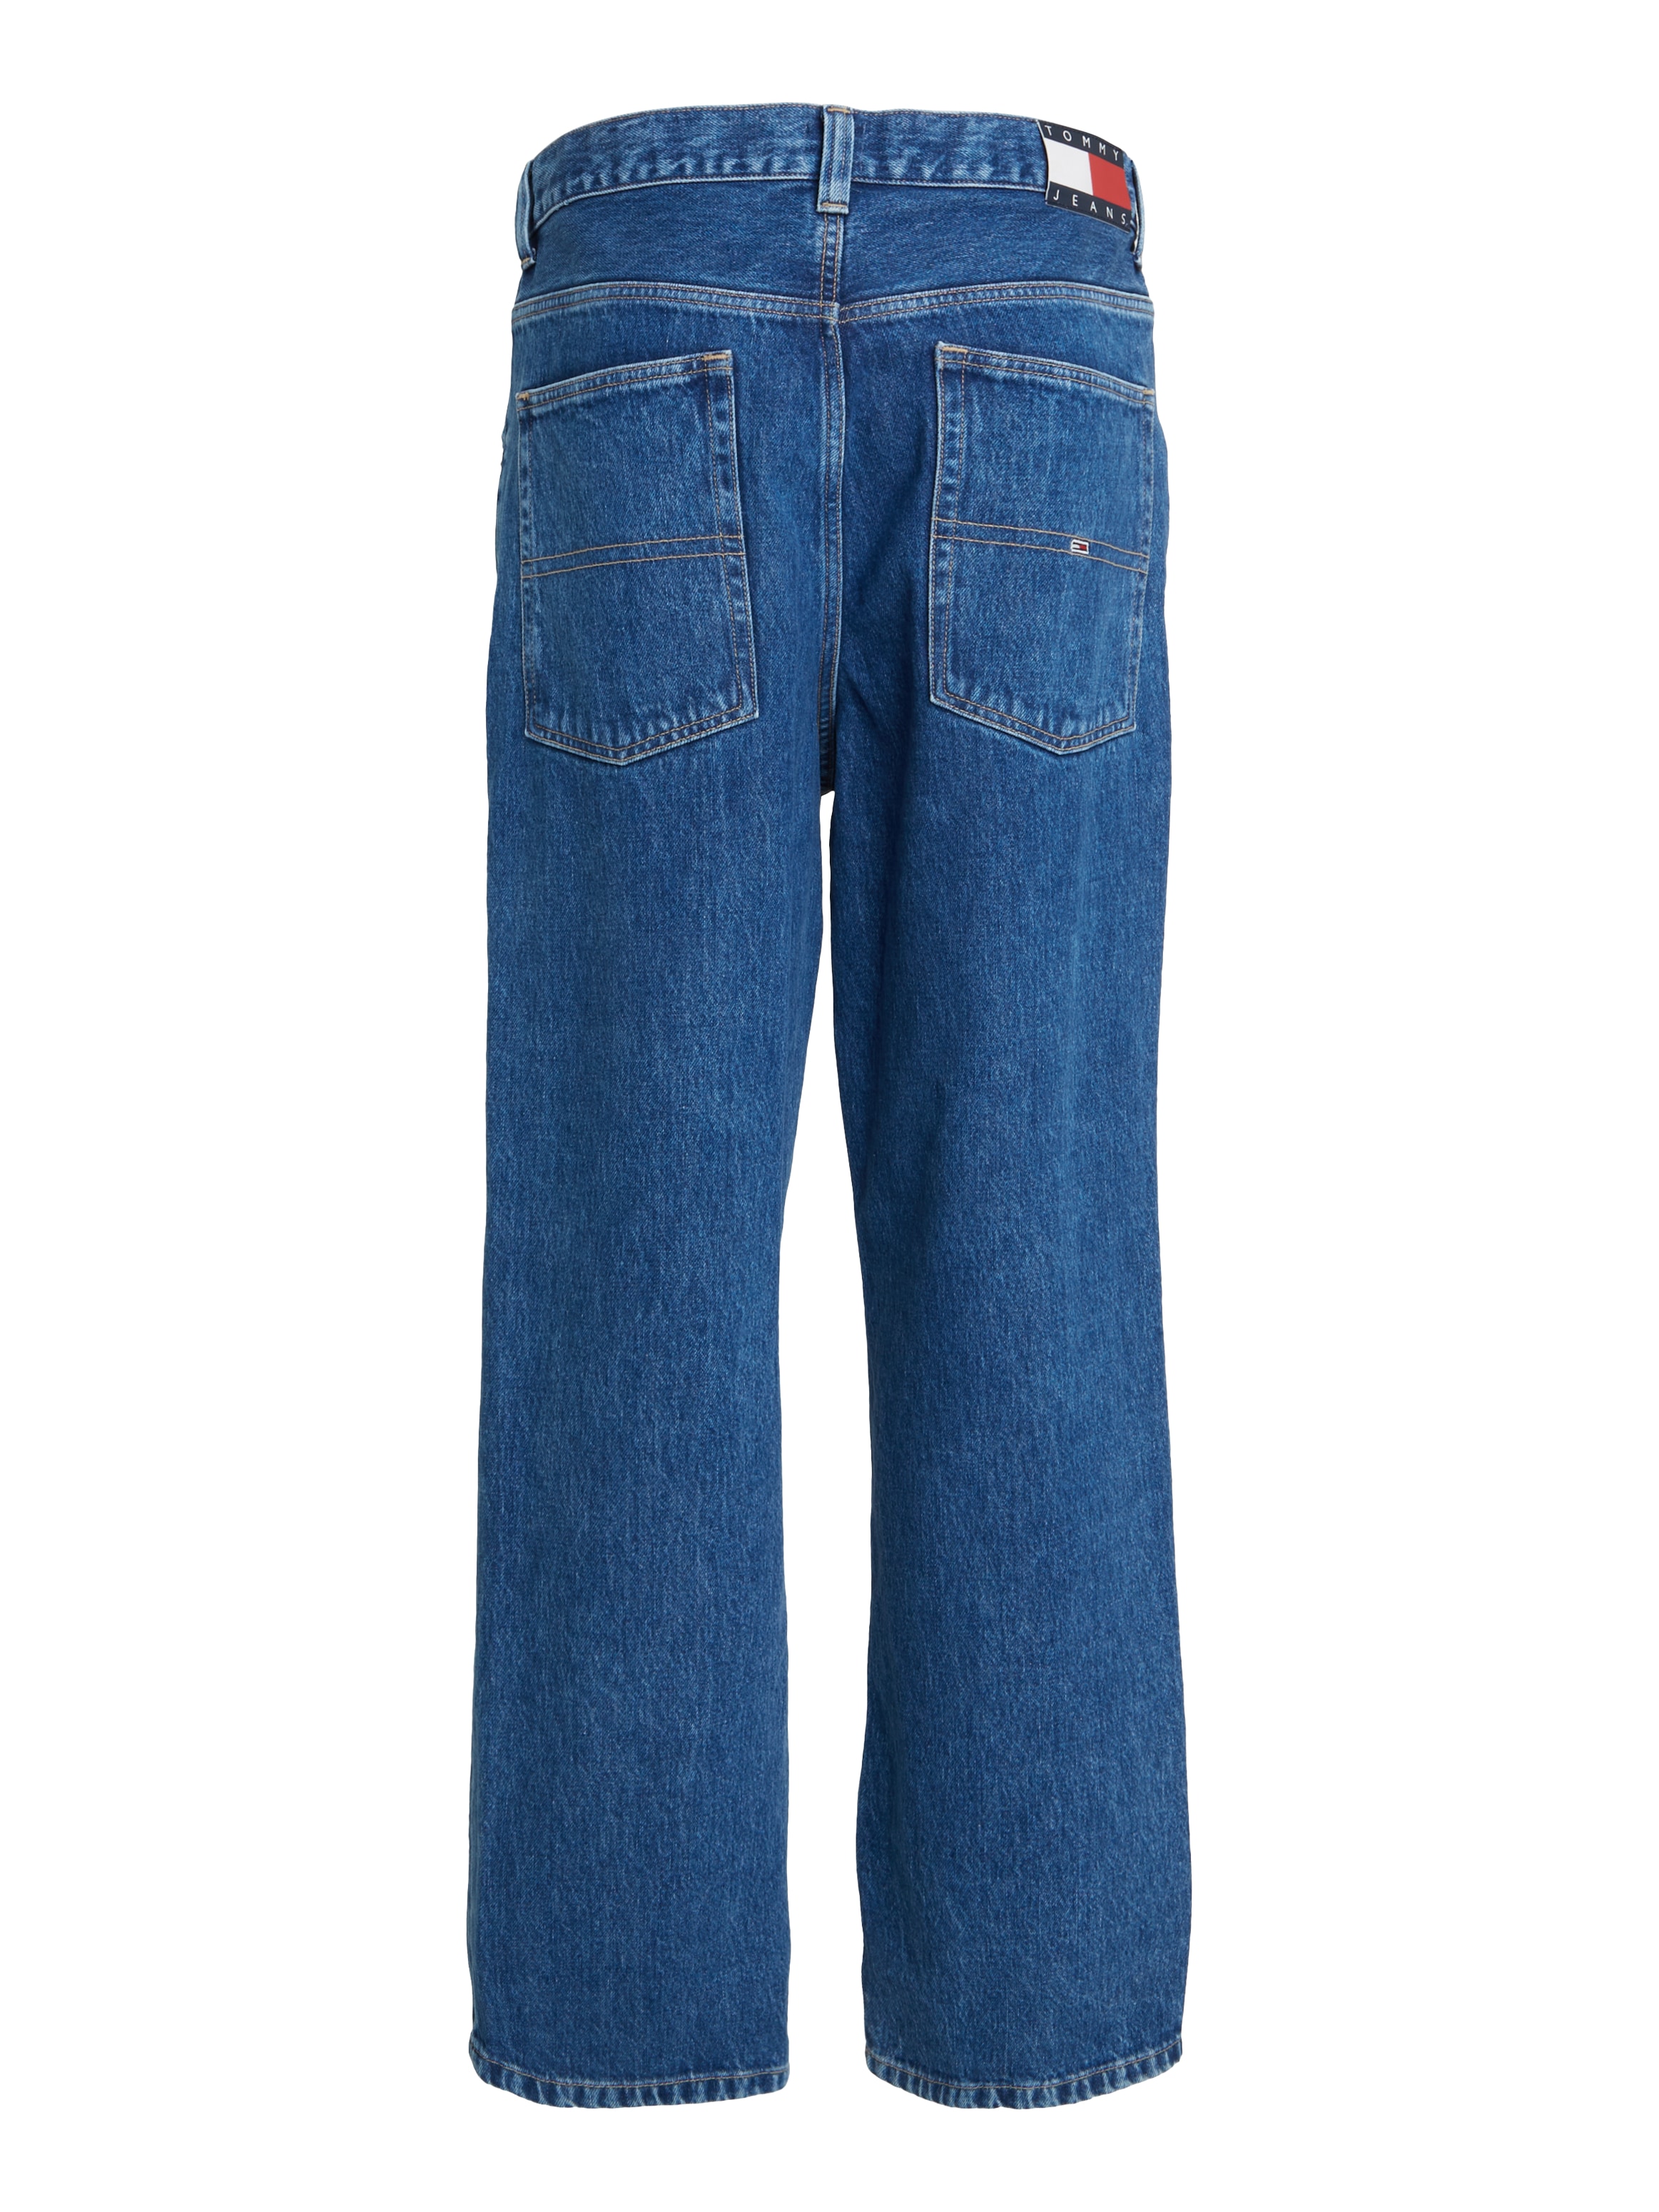 Tommy Jeans Weite Jeans »AIDEN BAGGY JEAN CG4039«, im 5-Pocket-Style